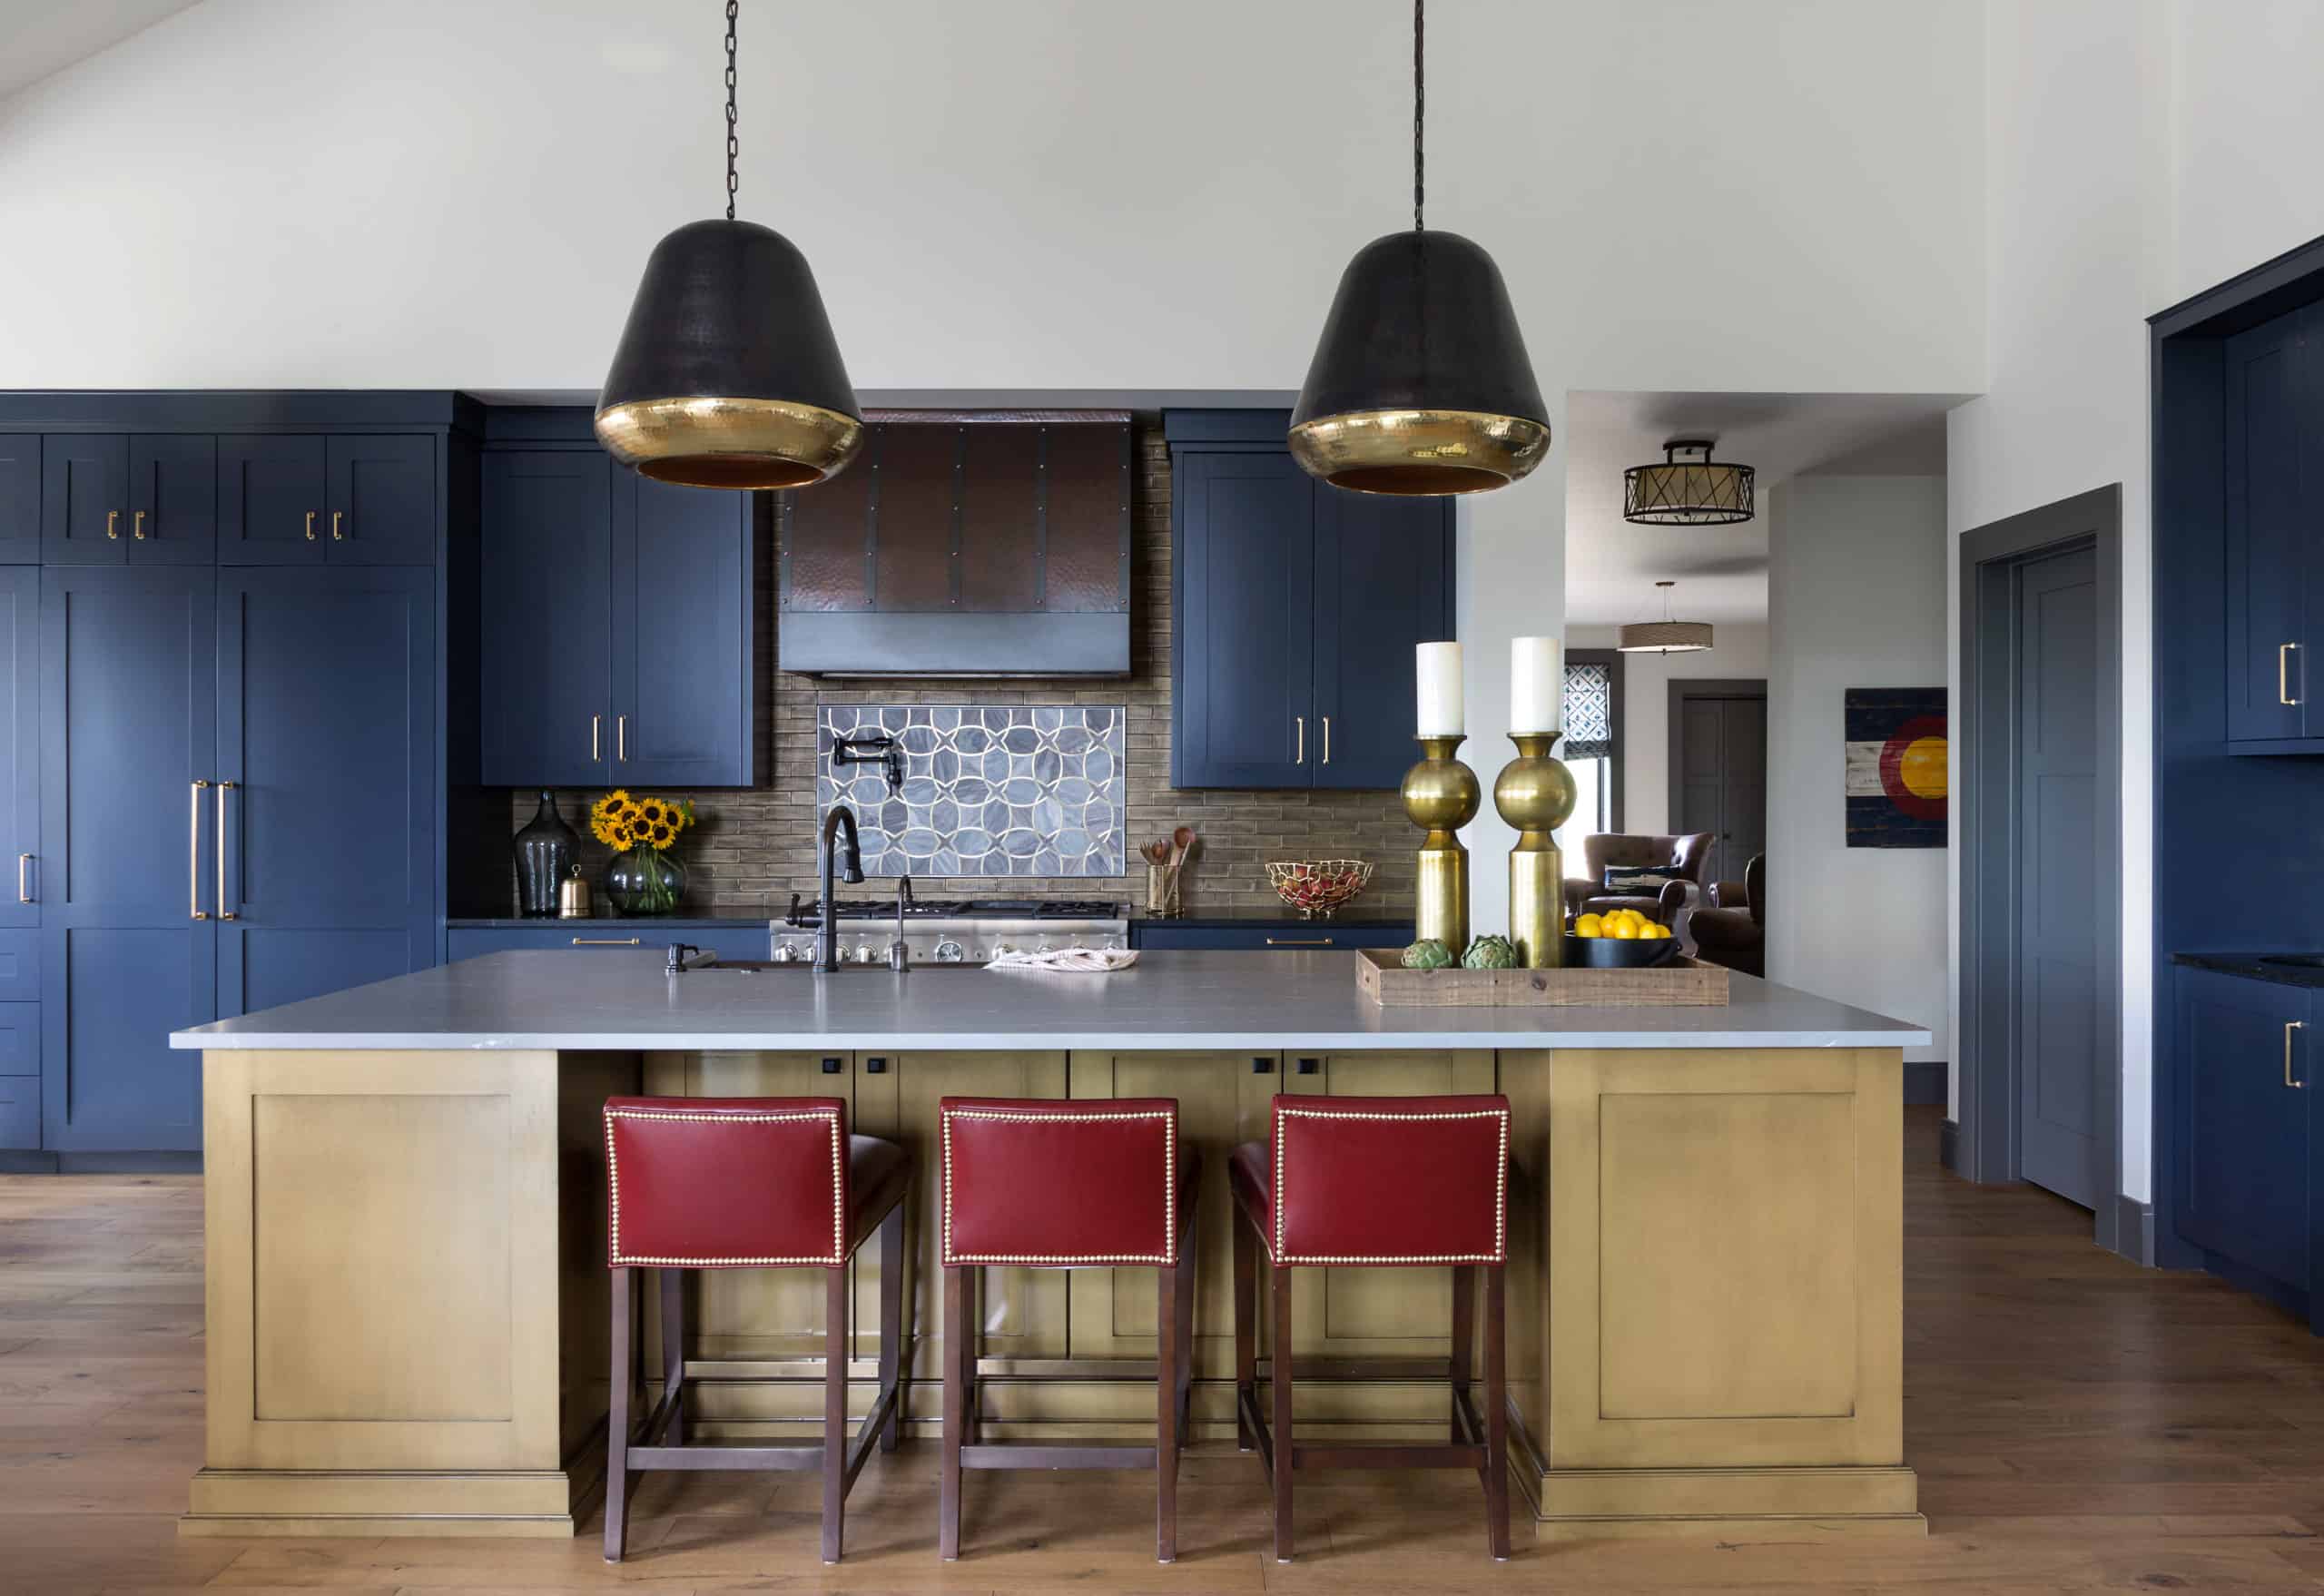 Navy cabinets and red leather stools with huge kitchen pendants